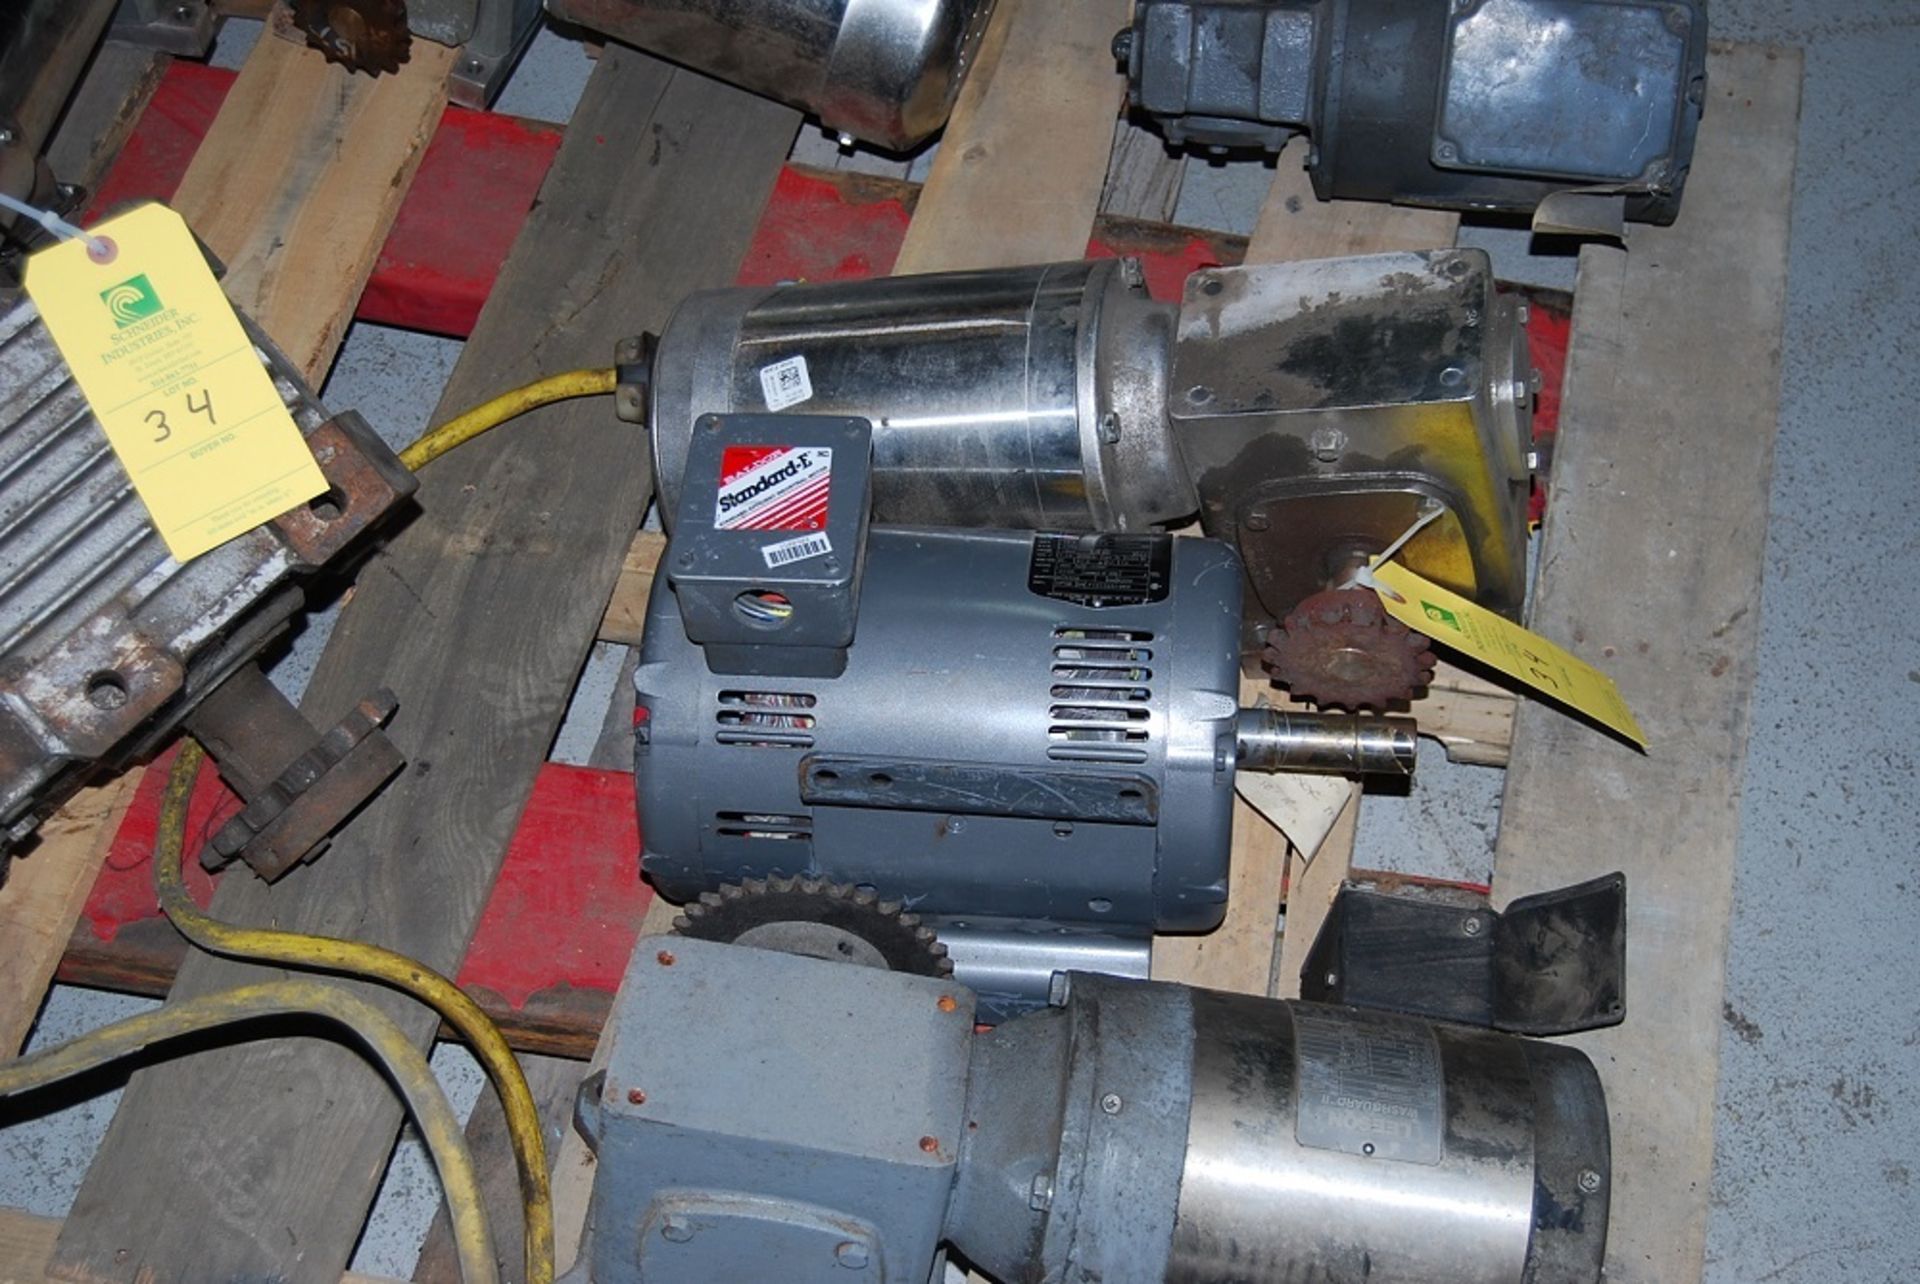 Pallet Of Miscellaneous Motors and Gear Boxes, Pallet: 40" x 48" x 20" tall - Image 6 of 6